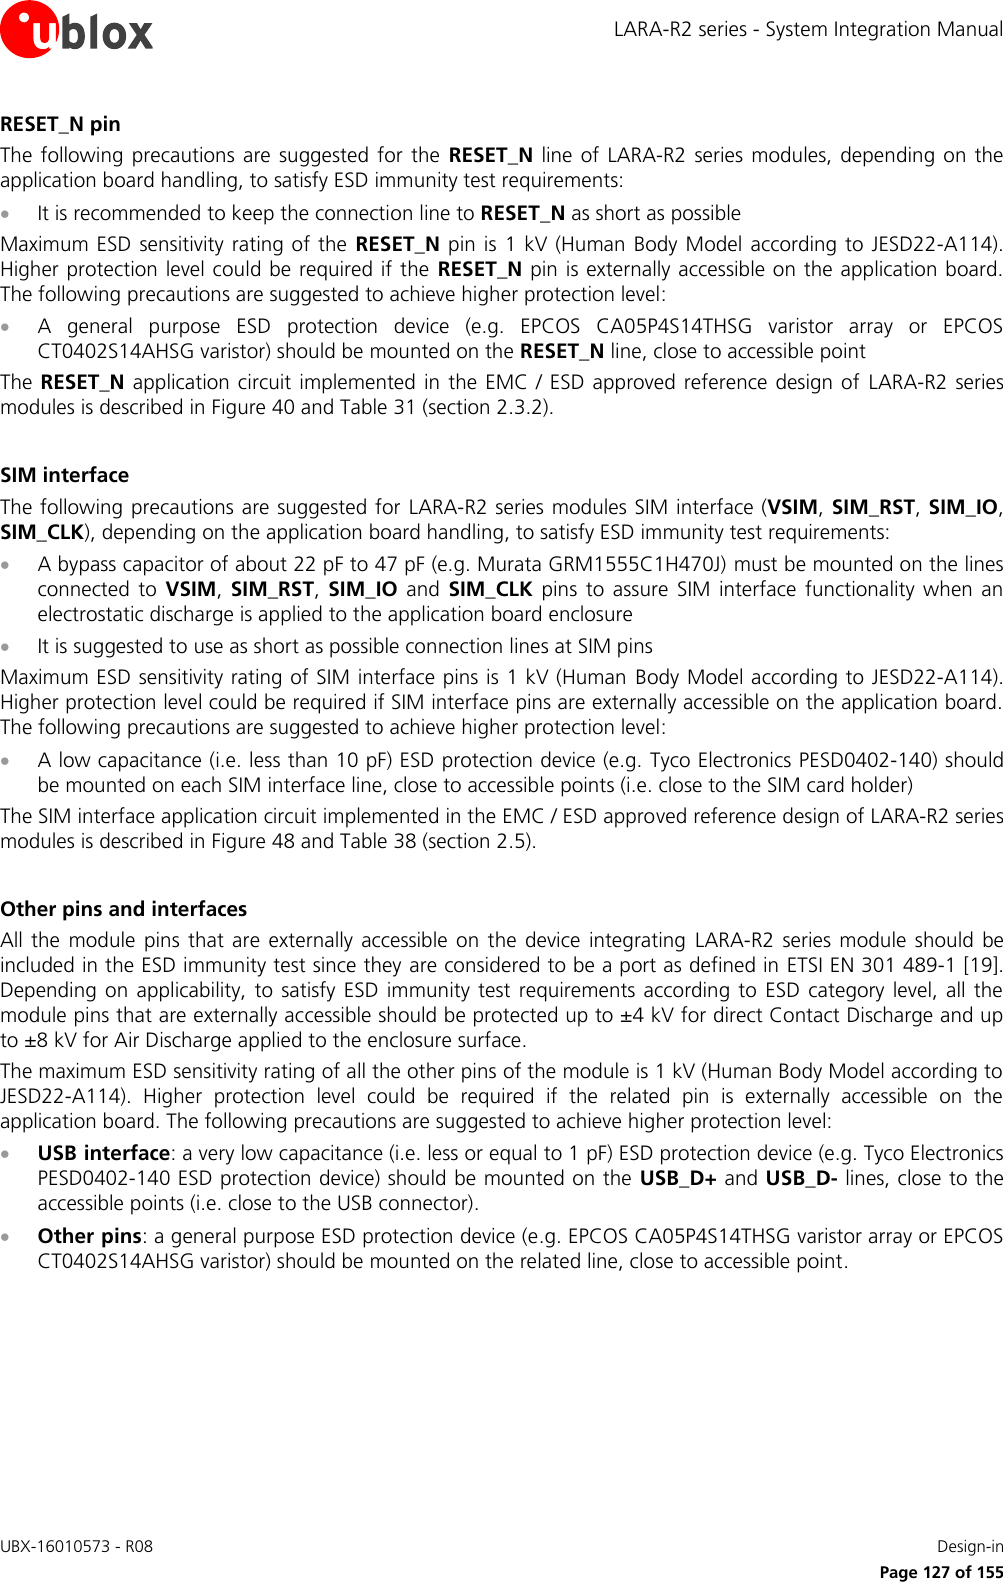 LARA-R2 series - System Integration Manual UBX-16010573 - R08    Design-in     Page 127 of 155 RESET_N pin The  following  precautions are  suggested  for  the  RESET_N  line  of  LARA-R2  series  modules,  depending  on  the application board handling, to satisfy ESD immunity test requirements:  It is recommended to keep the connection line to RESET_N as short as possible Maximum ESD  sensitivity rating of the  RESET_N pin  is  1 kV (Human  Body Model  according to JESD22-A114). Higher protection level could be required if the  RESET_N pin is externally accessible on the application board. The following precautions are suggested to achieve higher protection level:  A  general  purpose  ESD  protection  device  (e.g.  EPCOS  CA05P4S14THSG  varistor  array  or  EPCOS CT0402S14AHSG varistor) should be mounted on the RESET_N line, close to accessible point The RESET_N application circuit  implemented  in  the  EMC / ESD approved reference  design of  LARA-R2  series modules is described in Figure 40 and Table 31 (section 2.3.2).  SIM interface The following precautions are suggested for  LARA-R2 series modules SIM interface (VSIM, SIM_RST, SIM_IO, SIM_CLK), depending on the application board handling, to satisfy ESD immunity test requirements:  A bypass capacitor of about 22 pF to 47 pF (e.g. Murata GRM1555C1H470J) must be mounted on the lines connected  to  VSIM,  SIM_RST,  SIM_IO  and  SIM_CLK  pins  to  assure  SIM  interface  functionality  when  an electrostatic discharge is applied to the application board enclosure  It is suggested to use as short as possible connection lines at SIM pins Maximum ESD sensitivity rating of SIM interface pins is 1 kV (Human Body Model according to JESD22-A114). Higher protection level could be required if SIM interface pins are externally accessible on the application board. The following precautions are suggested to achieve higher protection level:  A low capacitance (i.e. less than 10 pF) ESD protection device (e.g. Tyco Electronics PESD0402-140) should be mounted on each SIM interface line, close to accessible points (i.e. close to the SIM card holder) The SIM interface application circuit implemented in the EMC / ESD approved reference design of LARA-R2 series modules is described in Figure 48 and Table 38 (section 2.5).  Other pins and interfaces All the  module  pins  that  are  externally  accessible  on the  device  integrating  LARA-R2  series  module  should be included in the ESD immunity test since they are considered to be a port as defined in ETSI EN 301 489-1 [19]. Depending on  applicability,  to  satisfy  ESD  immunity test  requirements  according to  ESD  category  level,  all  the module pins that are externally accessible should be protected up to ±4 kV for direct Contact Discharge and up to ±8 kV for Air Discharge applied to the enclosure surface. The maximum ESD sensitivity rating of all the other pins of the module is 1 kV (Human Body Model according to JESD22-A114).  Higher  protection  level  could  be  required  if  the  related  pin  is  externally  accessible  on  the application board. The following precautions are suggested to achieve higher protection level:  USB interface: a very low capacitance (i.e. less or equal to 1 pF) ESD protection device (e.g. Tyco Electronics PESD0402-140 ESD protection device) should be mounted on the USB_D+ and USB_D- lines, close to the accessible points (i.e. close to the USB connector).  Other pins: a general purpose ESD protection device (e.g. EPCOS CA05P4S14THSG varistor array or EPCOS CT0402S14AHSG varistor) should be mounted on the related line, close to accessible point.  